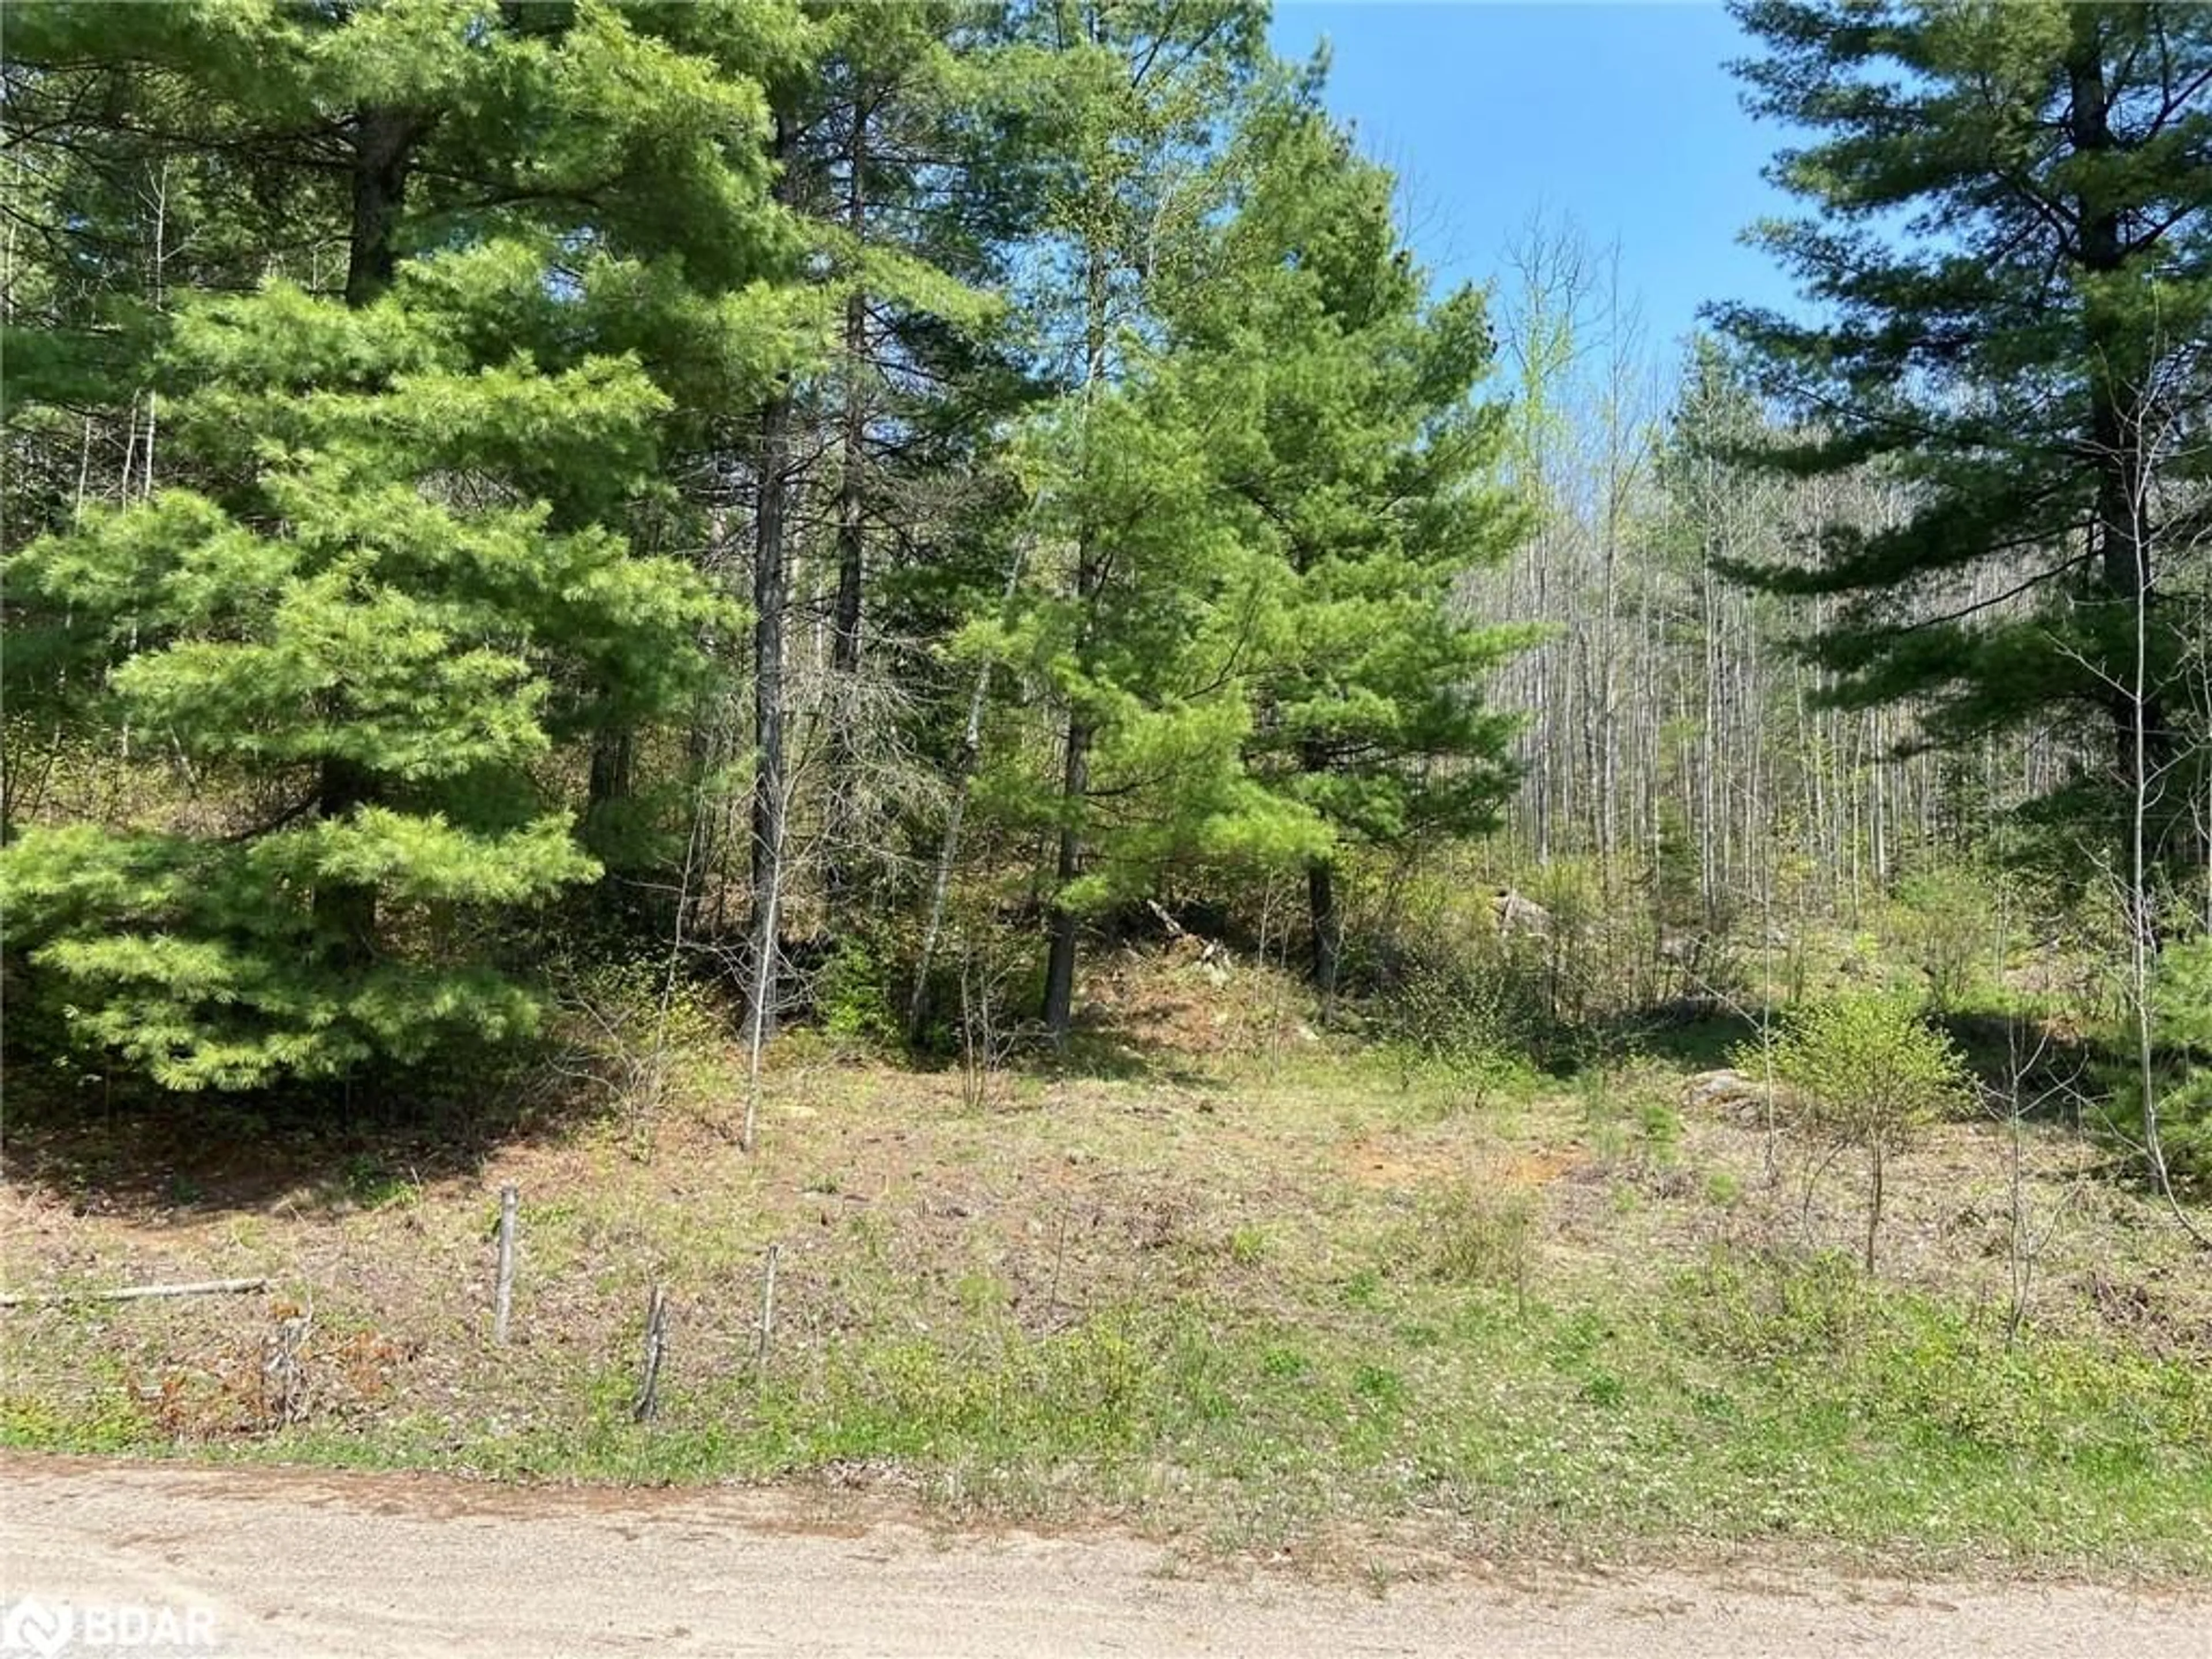 Forest view for N/A Boulter Lake Rd, Hastings Highlands Ontario K0L 2K0